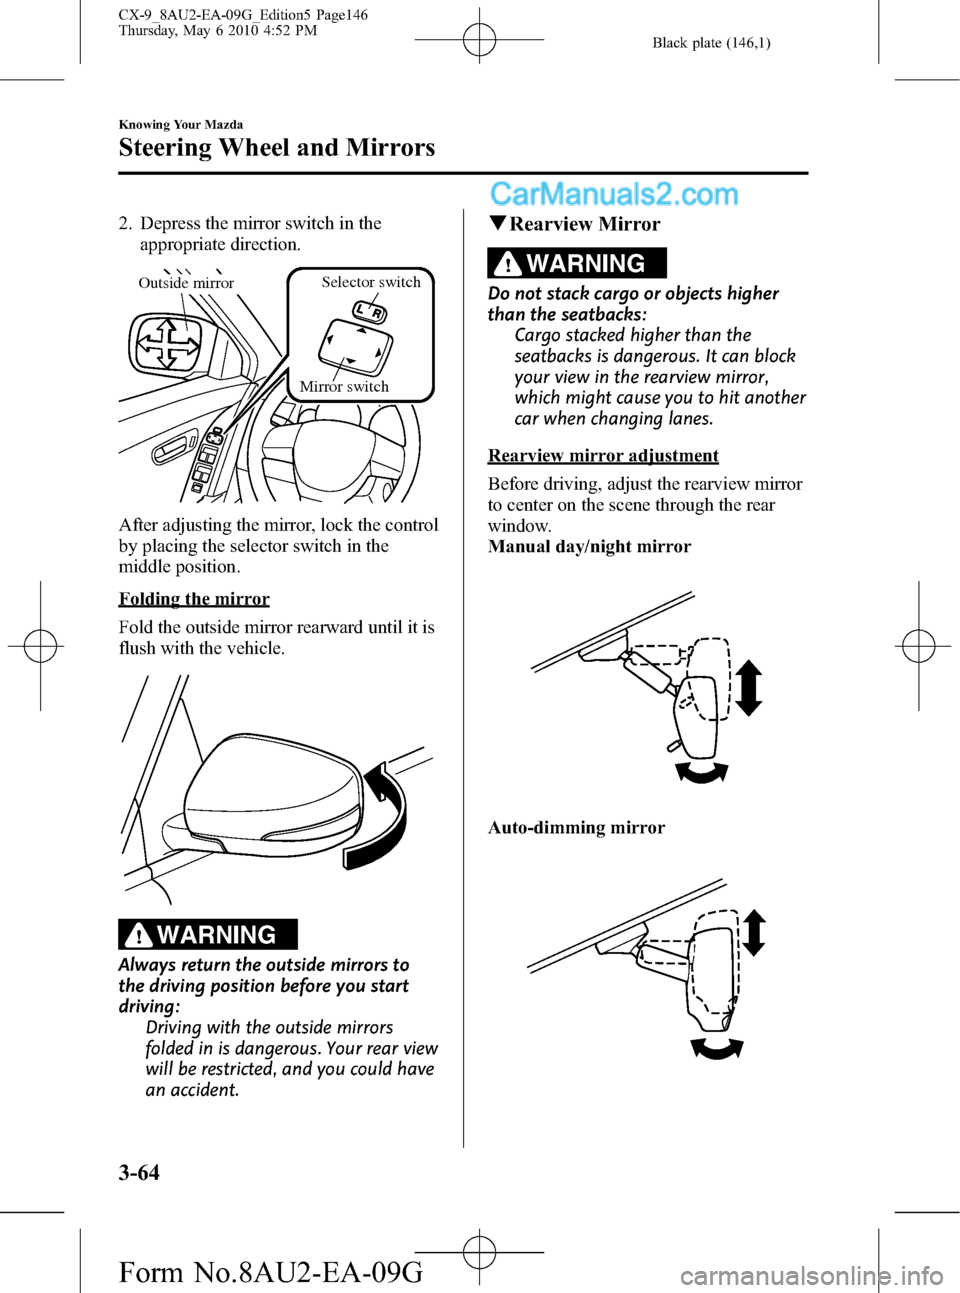 MAZDA MODEL CX-9 2010  Owners Manual (in English) Black plate (146,1)
2. Depress the mirror switch in the
appropriate direction.
Outside mirrorSelector switch
Mirror switch
After adjusting the mirror, lock the control
by placing the selector switch i